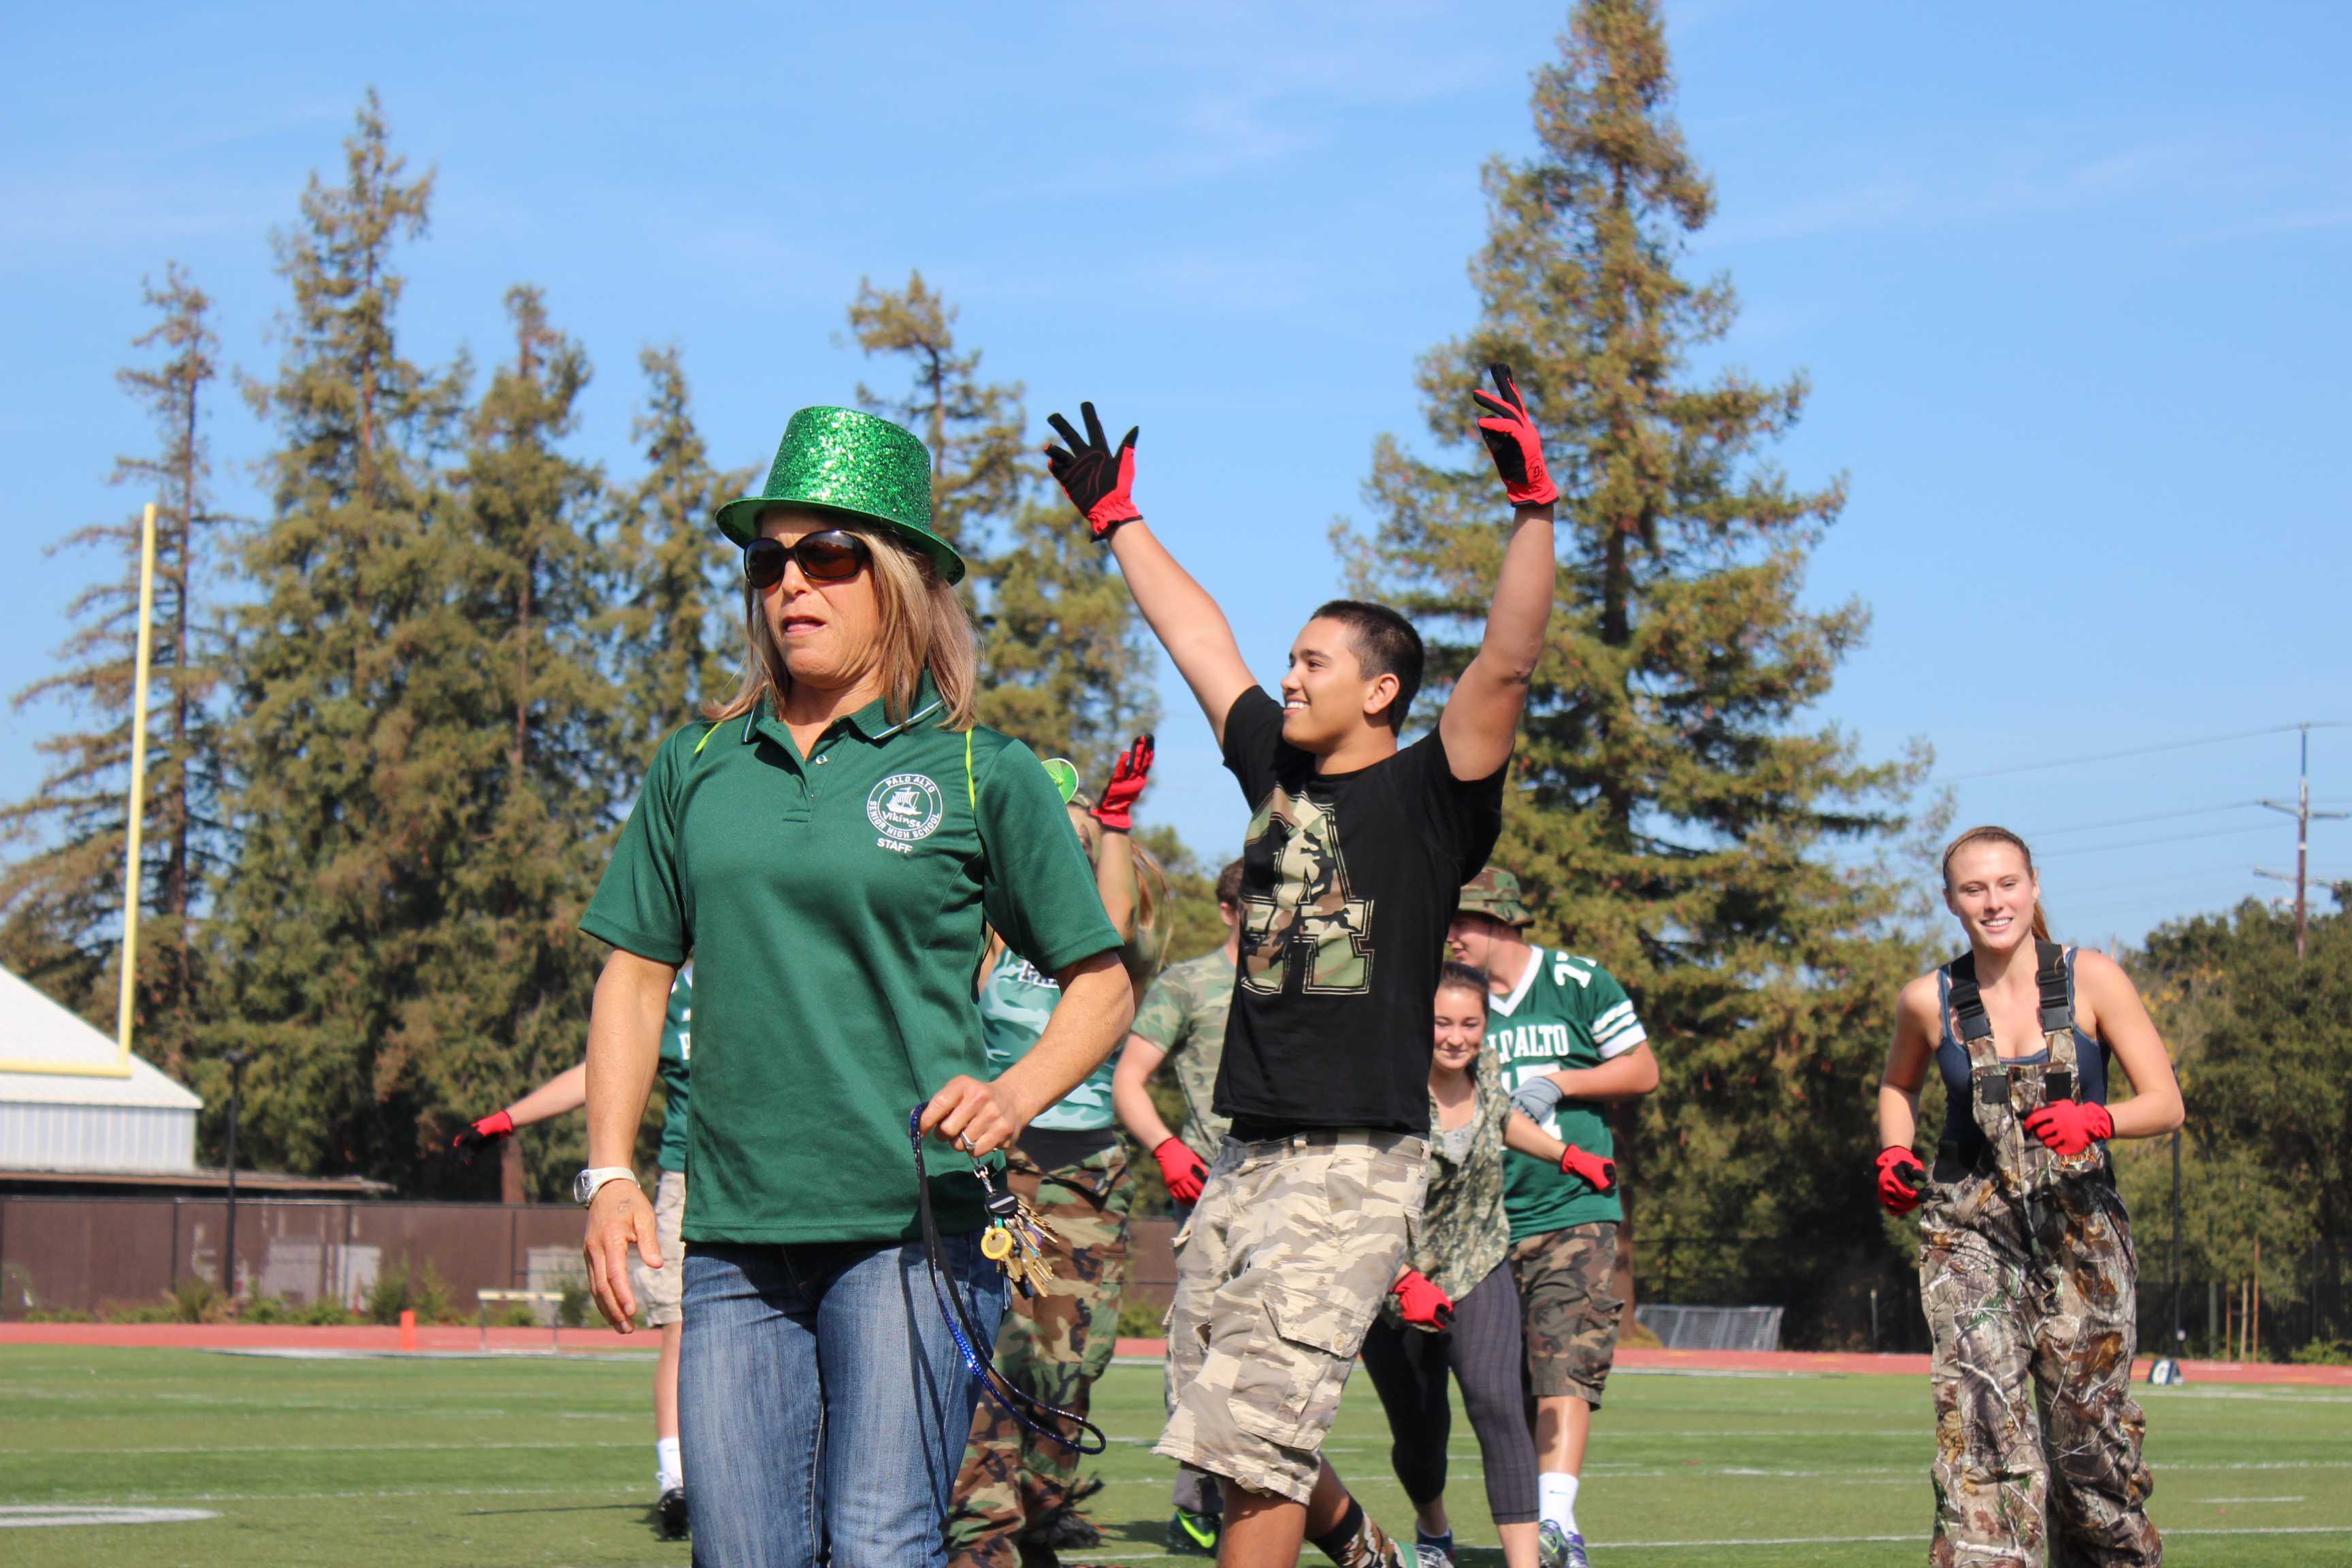 Seniors get pumped for Tug of War. They win the event after beating the freshmen. Photo by Lizzie Chun.